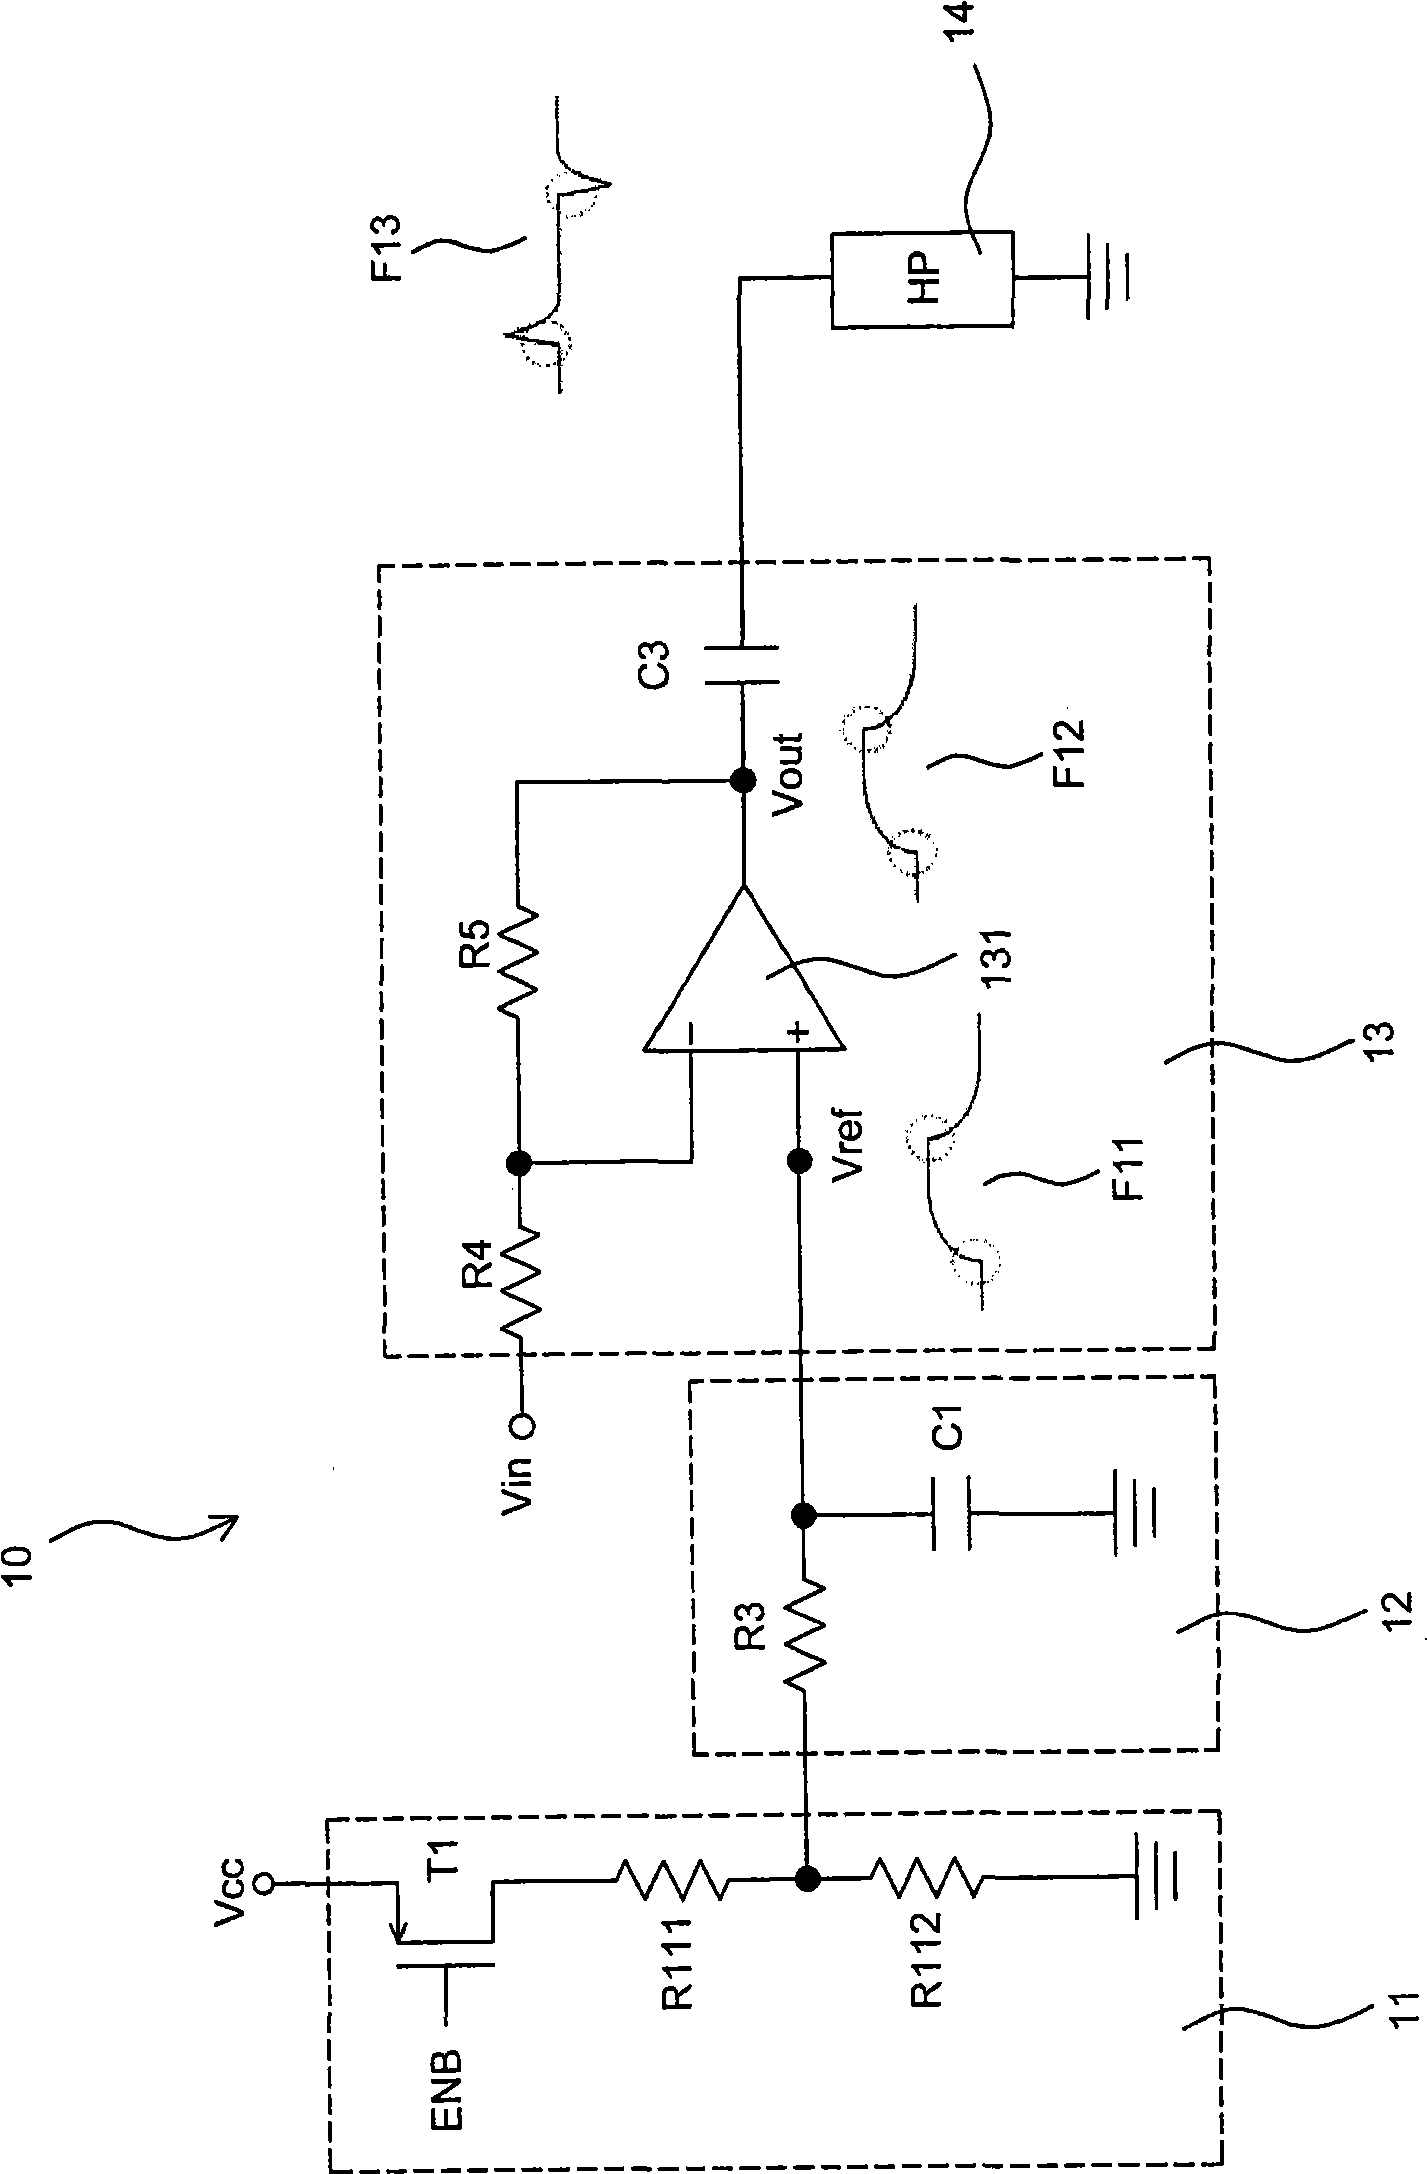 Voice drive circuit for reducing sonic boom when switching on and shutting down